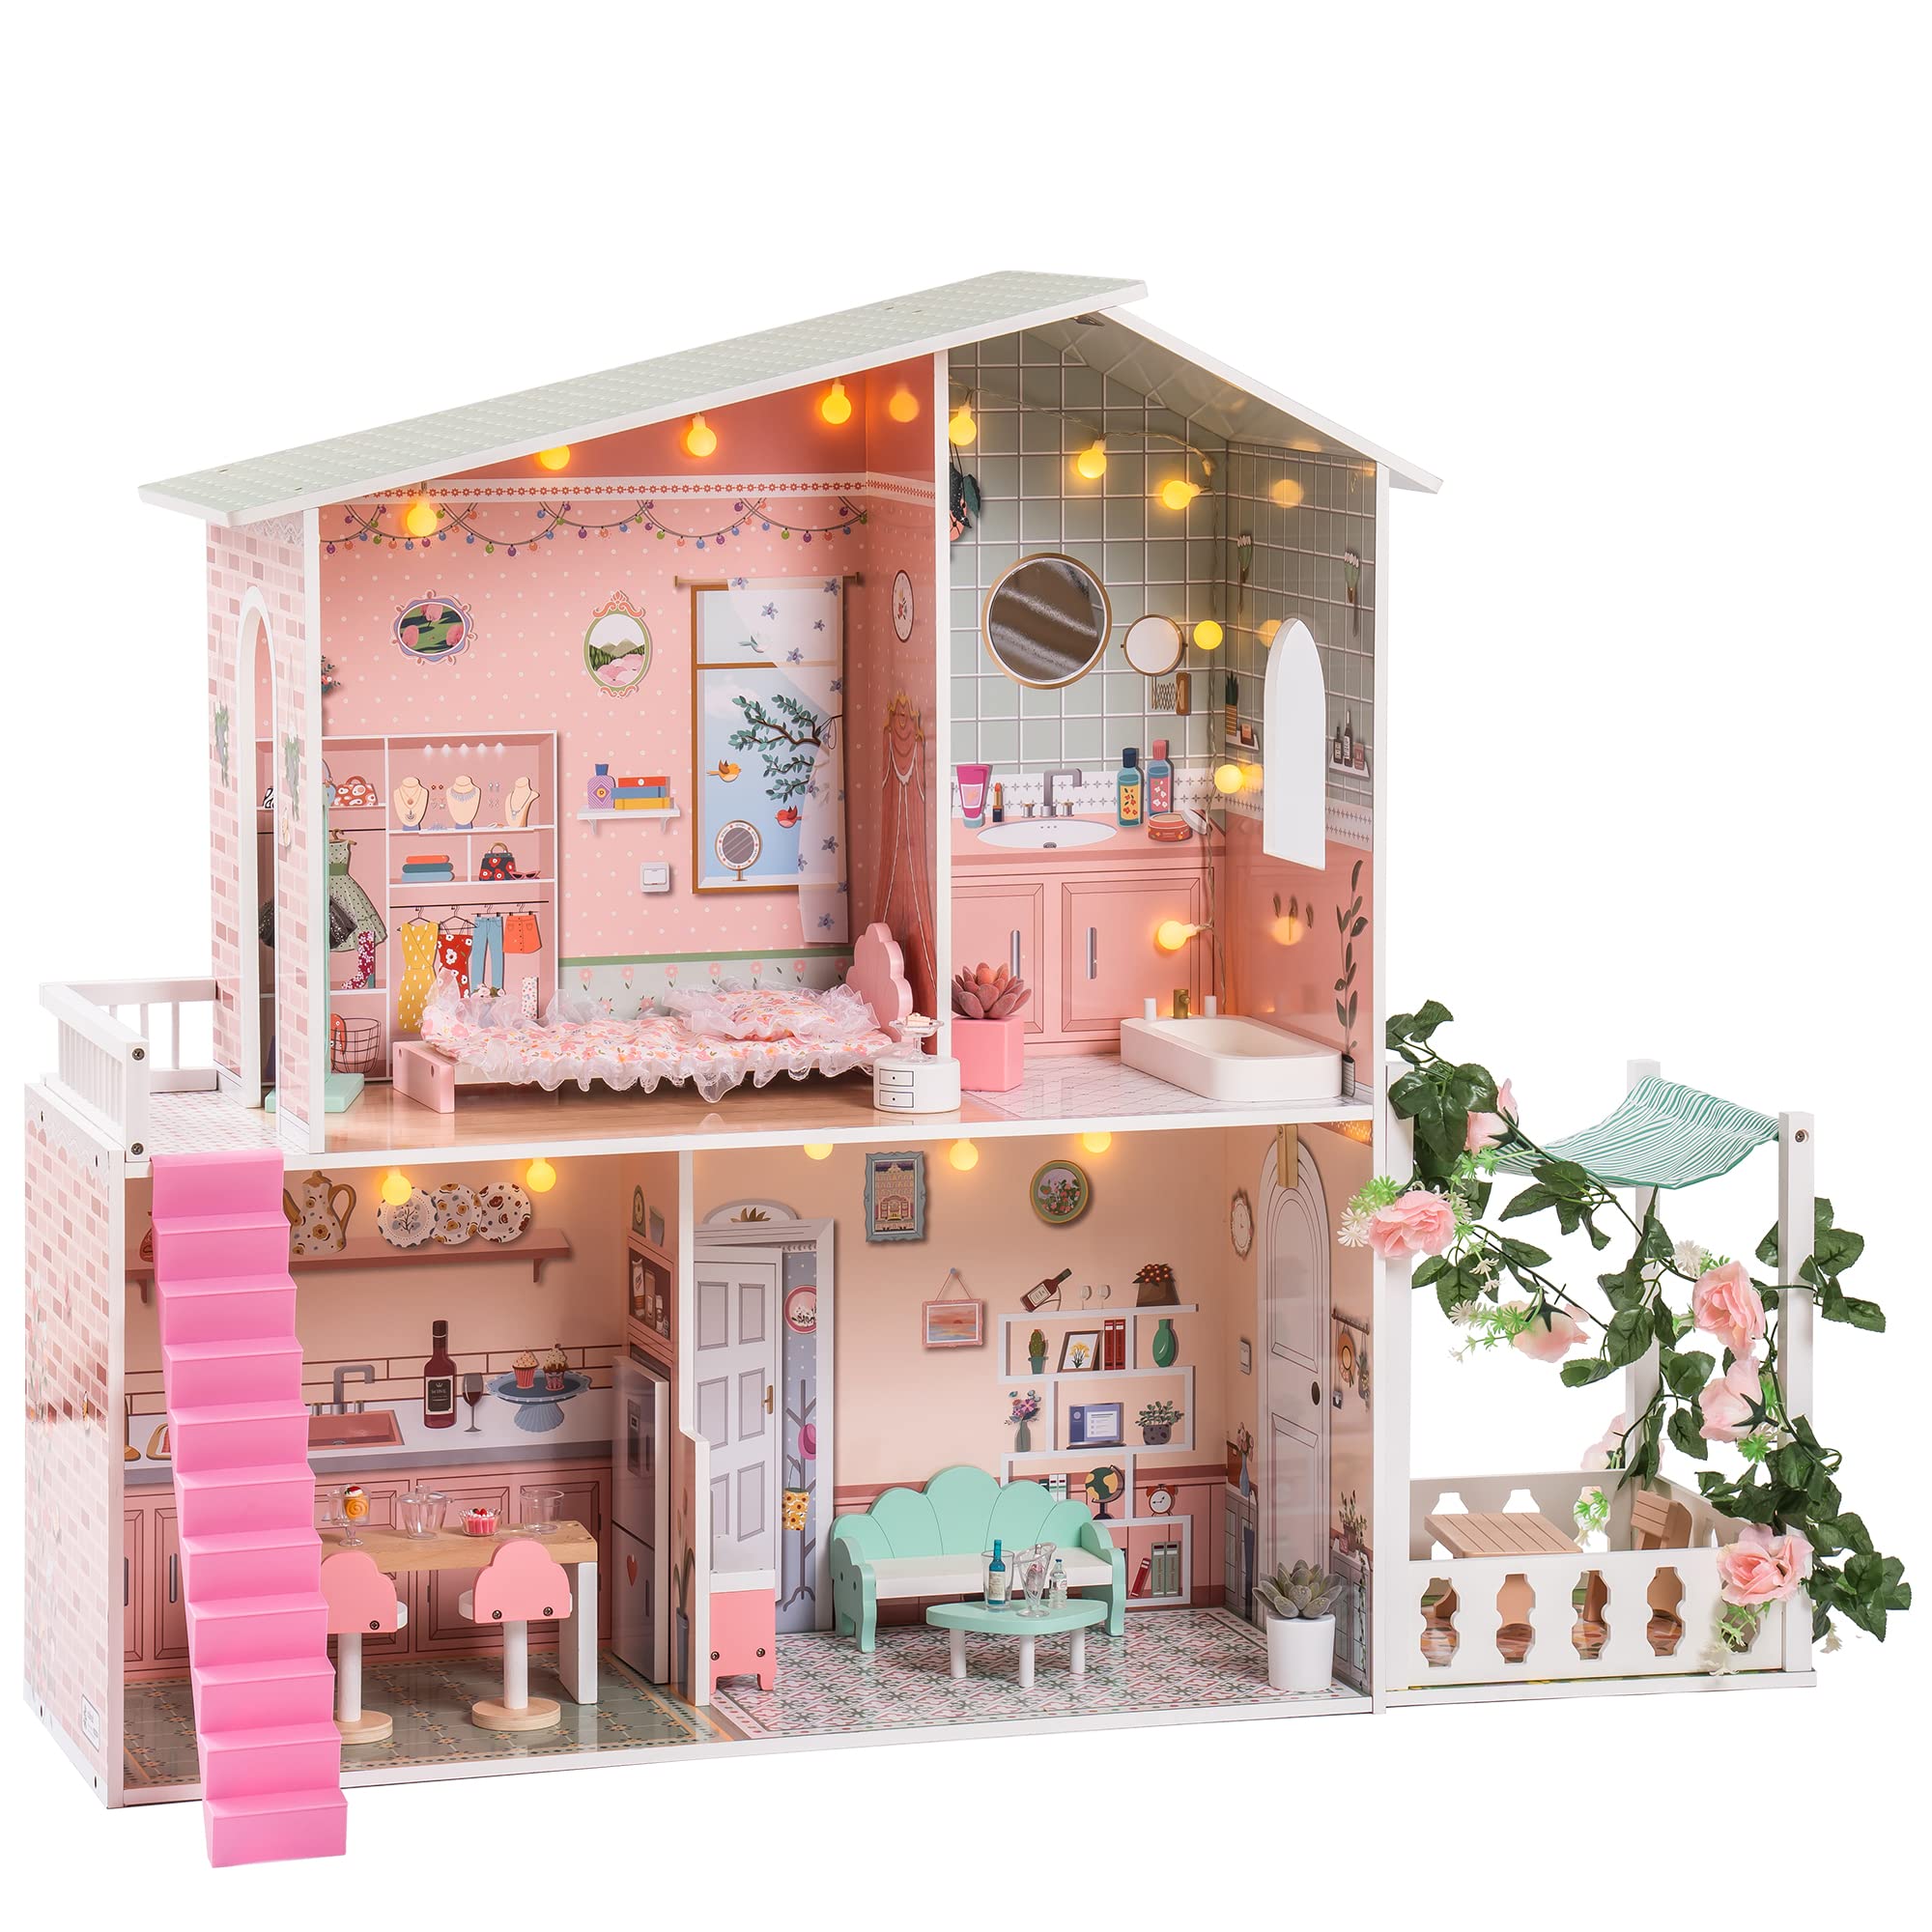 ROBUD Doll House, Wooden Dollhouse for Kids Toddler with Light, Garden, Ladder, 25pcs Realistic Accessories, Gift for 3+ Years Old Girls Boys, Pink